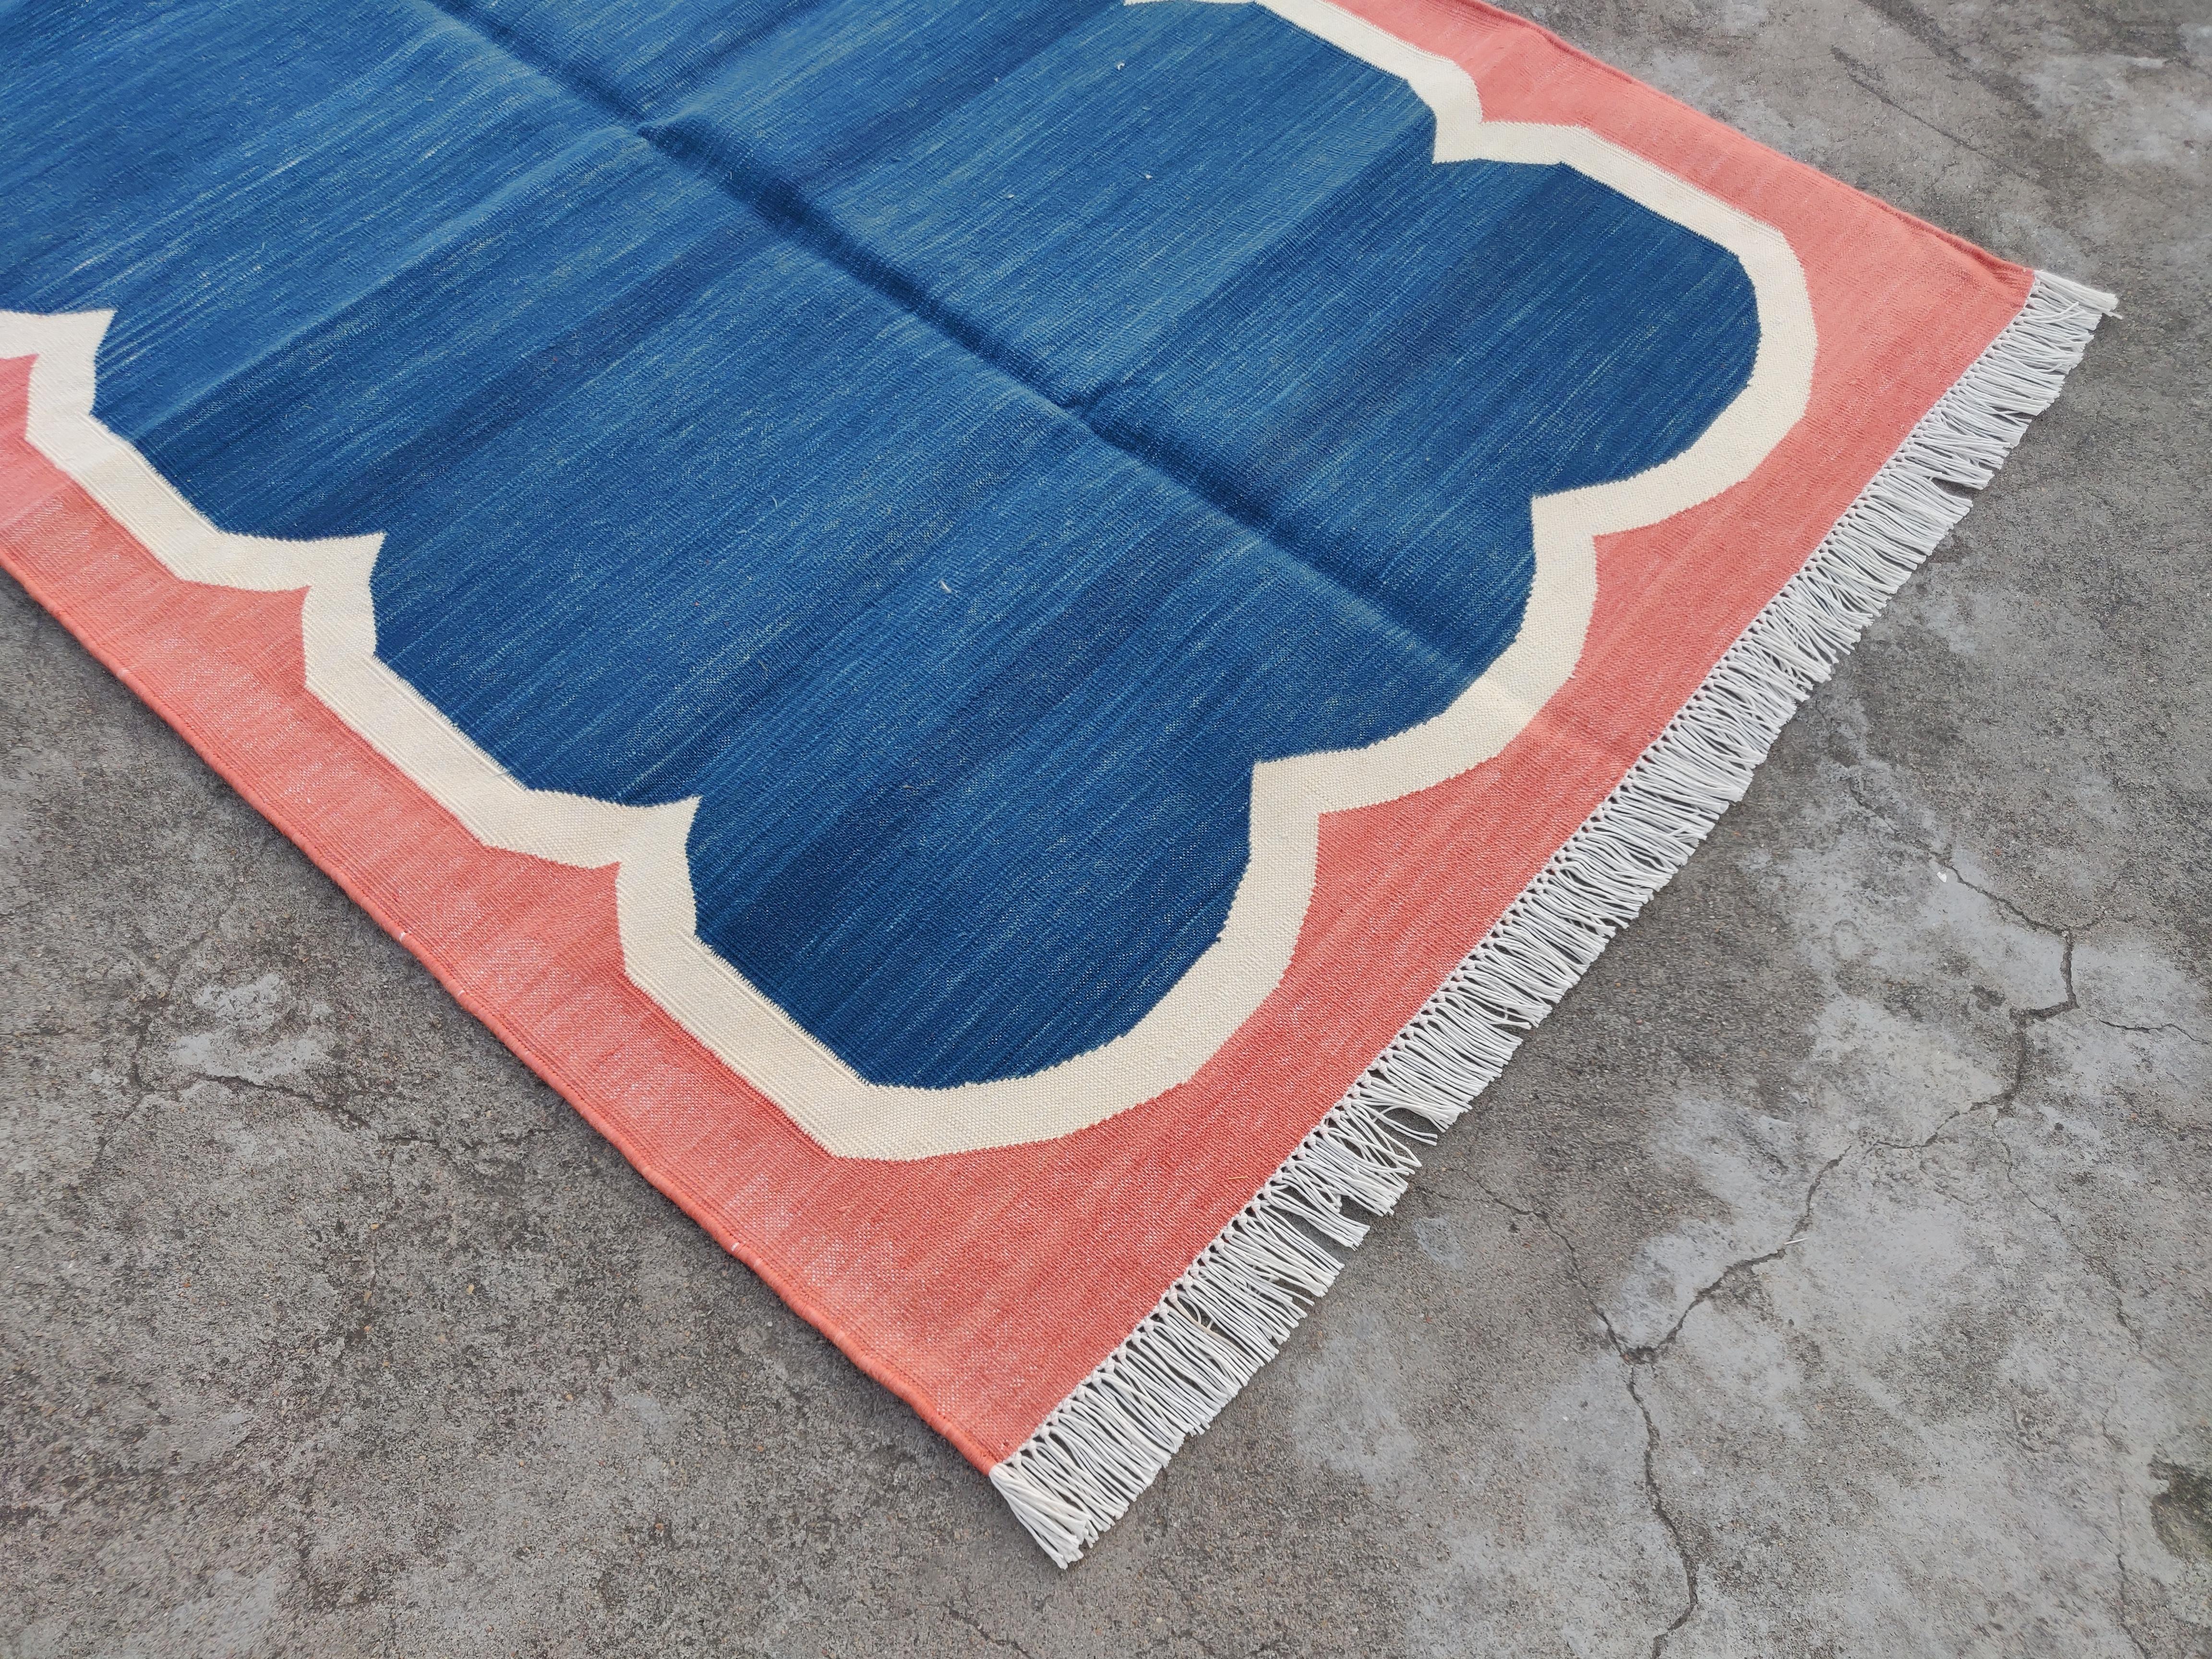 Hand-Woven Handmade Cotton Area Flat Weave Rug, 3x5 Blue And Coral Scalloped Indian Dhurrie For Sale